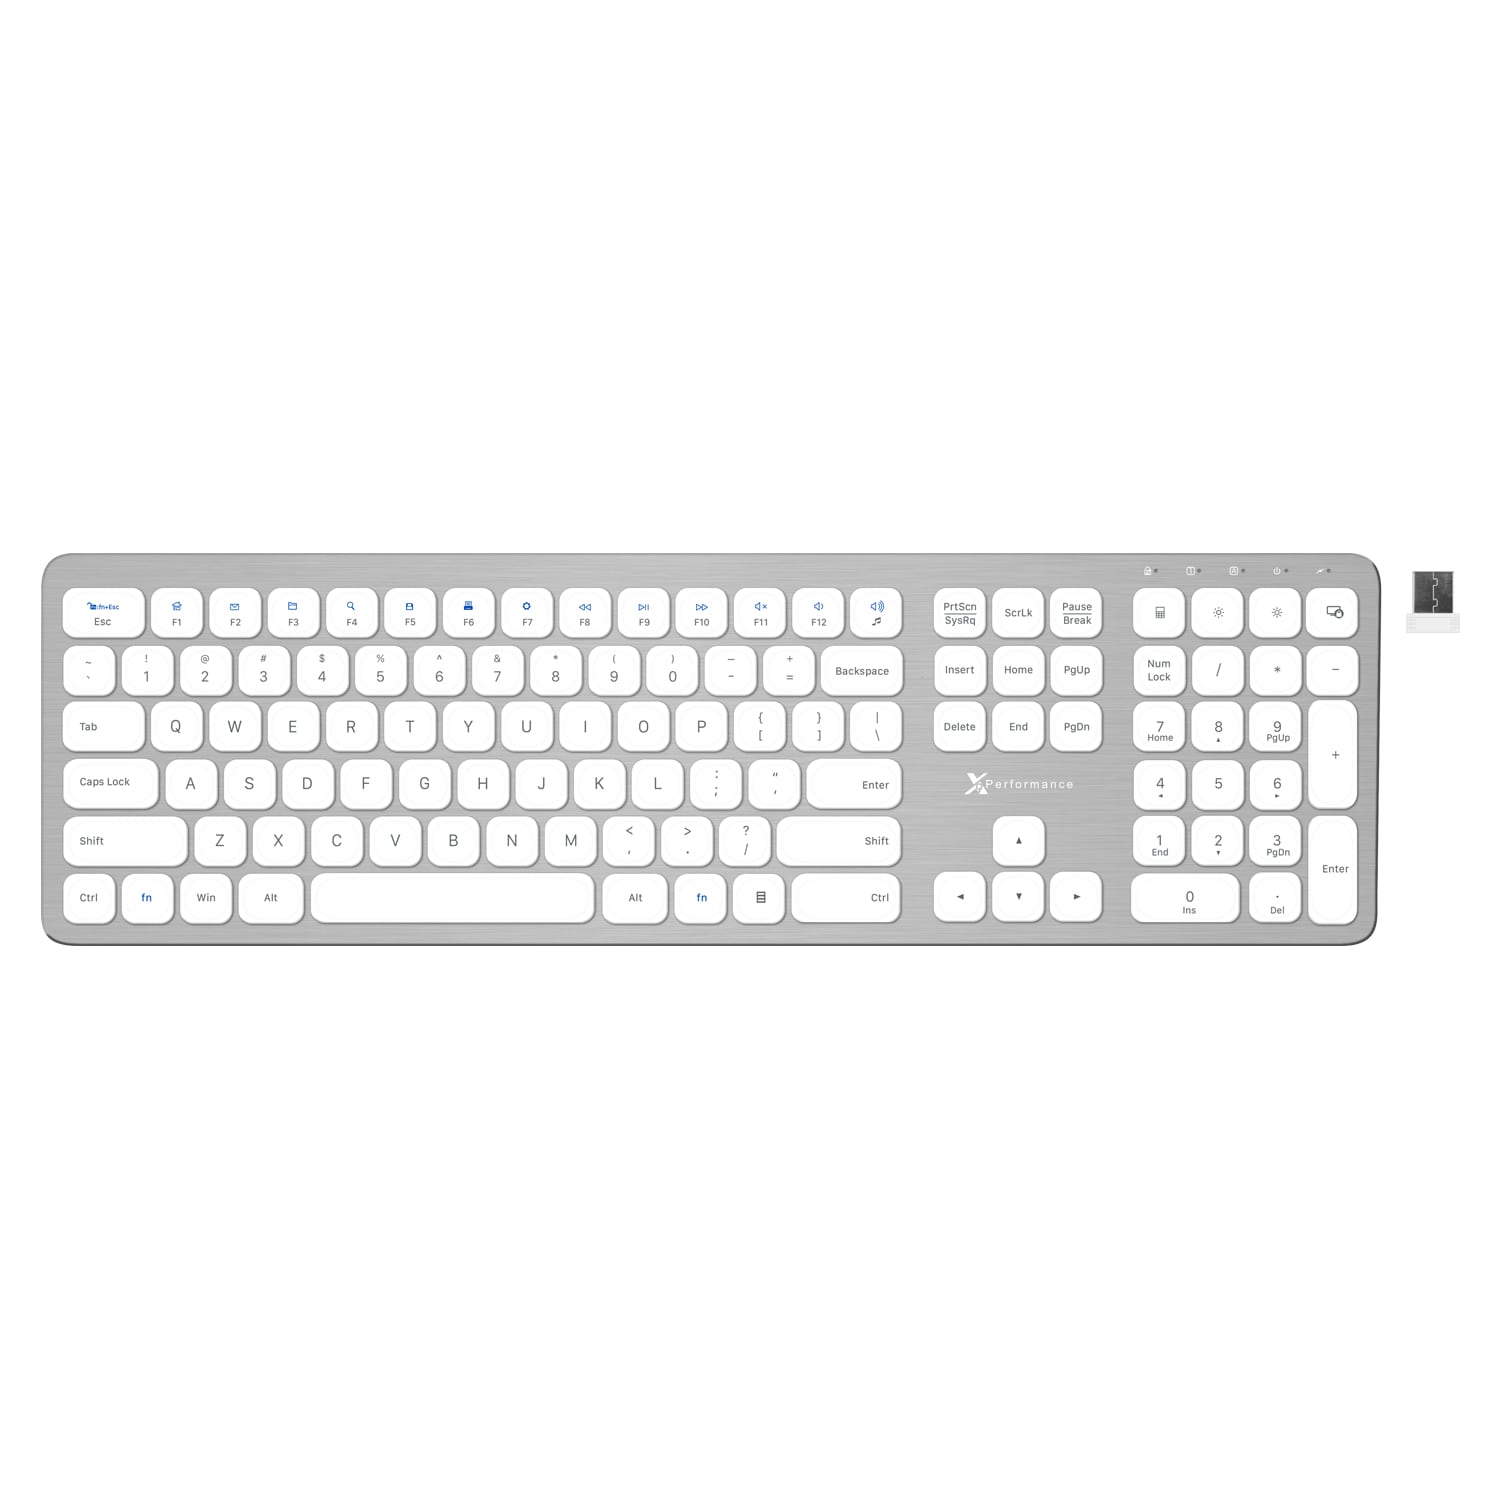 montage klassekammerat Accepteret Macally X9 Performance Slim 2.4G USB Wireless Keyboard for Laptop or  Computer - Designed for Windows - 110 Key Layout with Numeric Keypad and 17  Shortcut Keys - Rechargeable PC Keyboard Wireless -